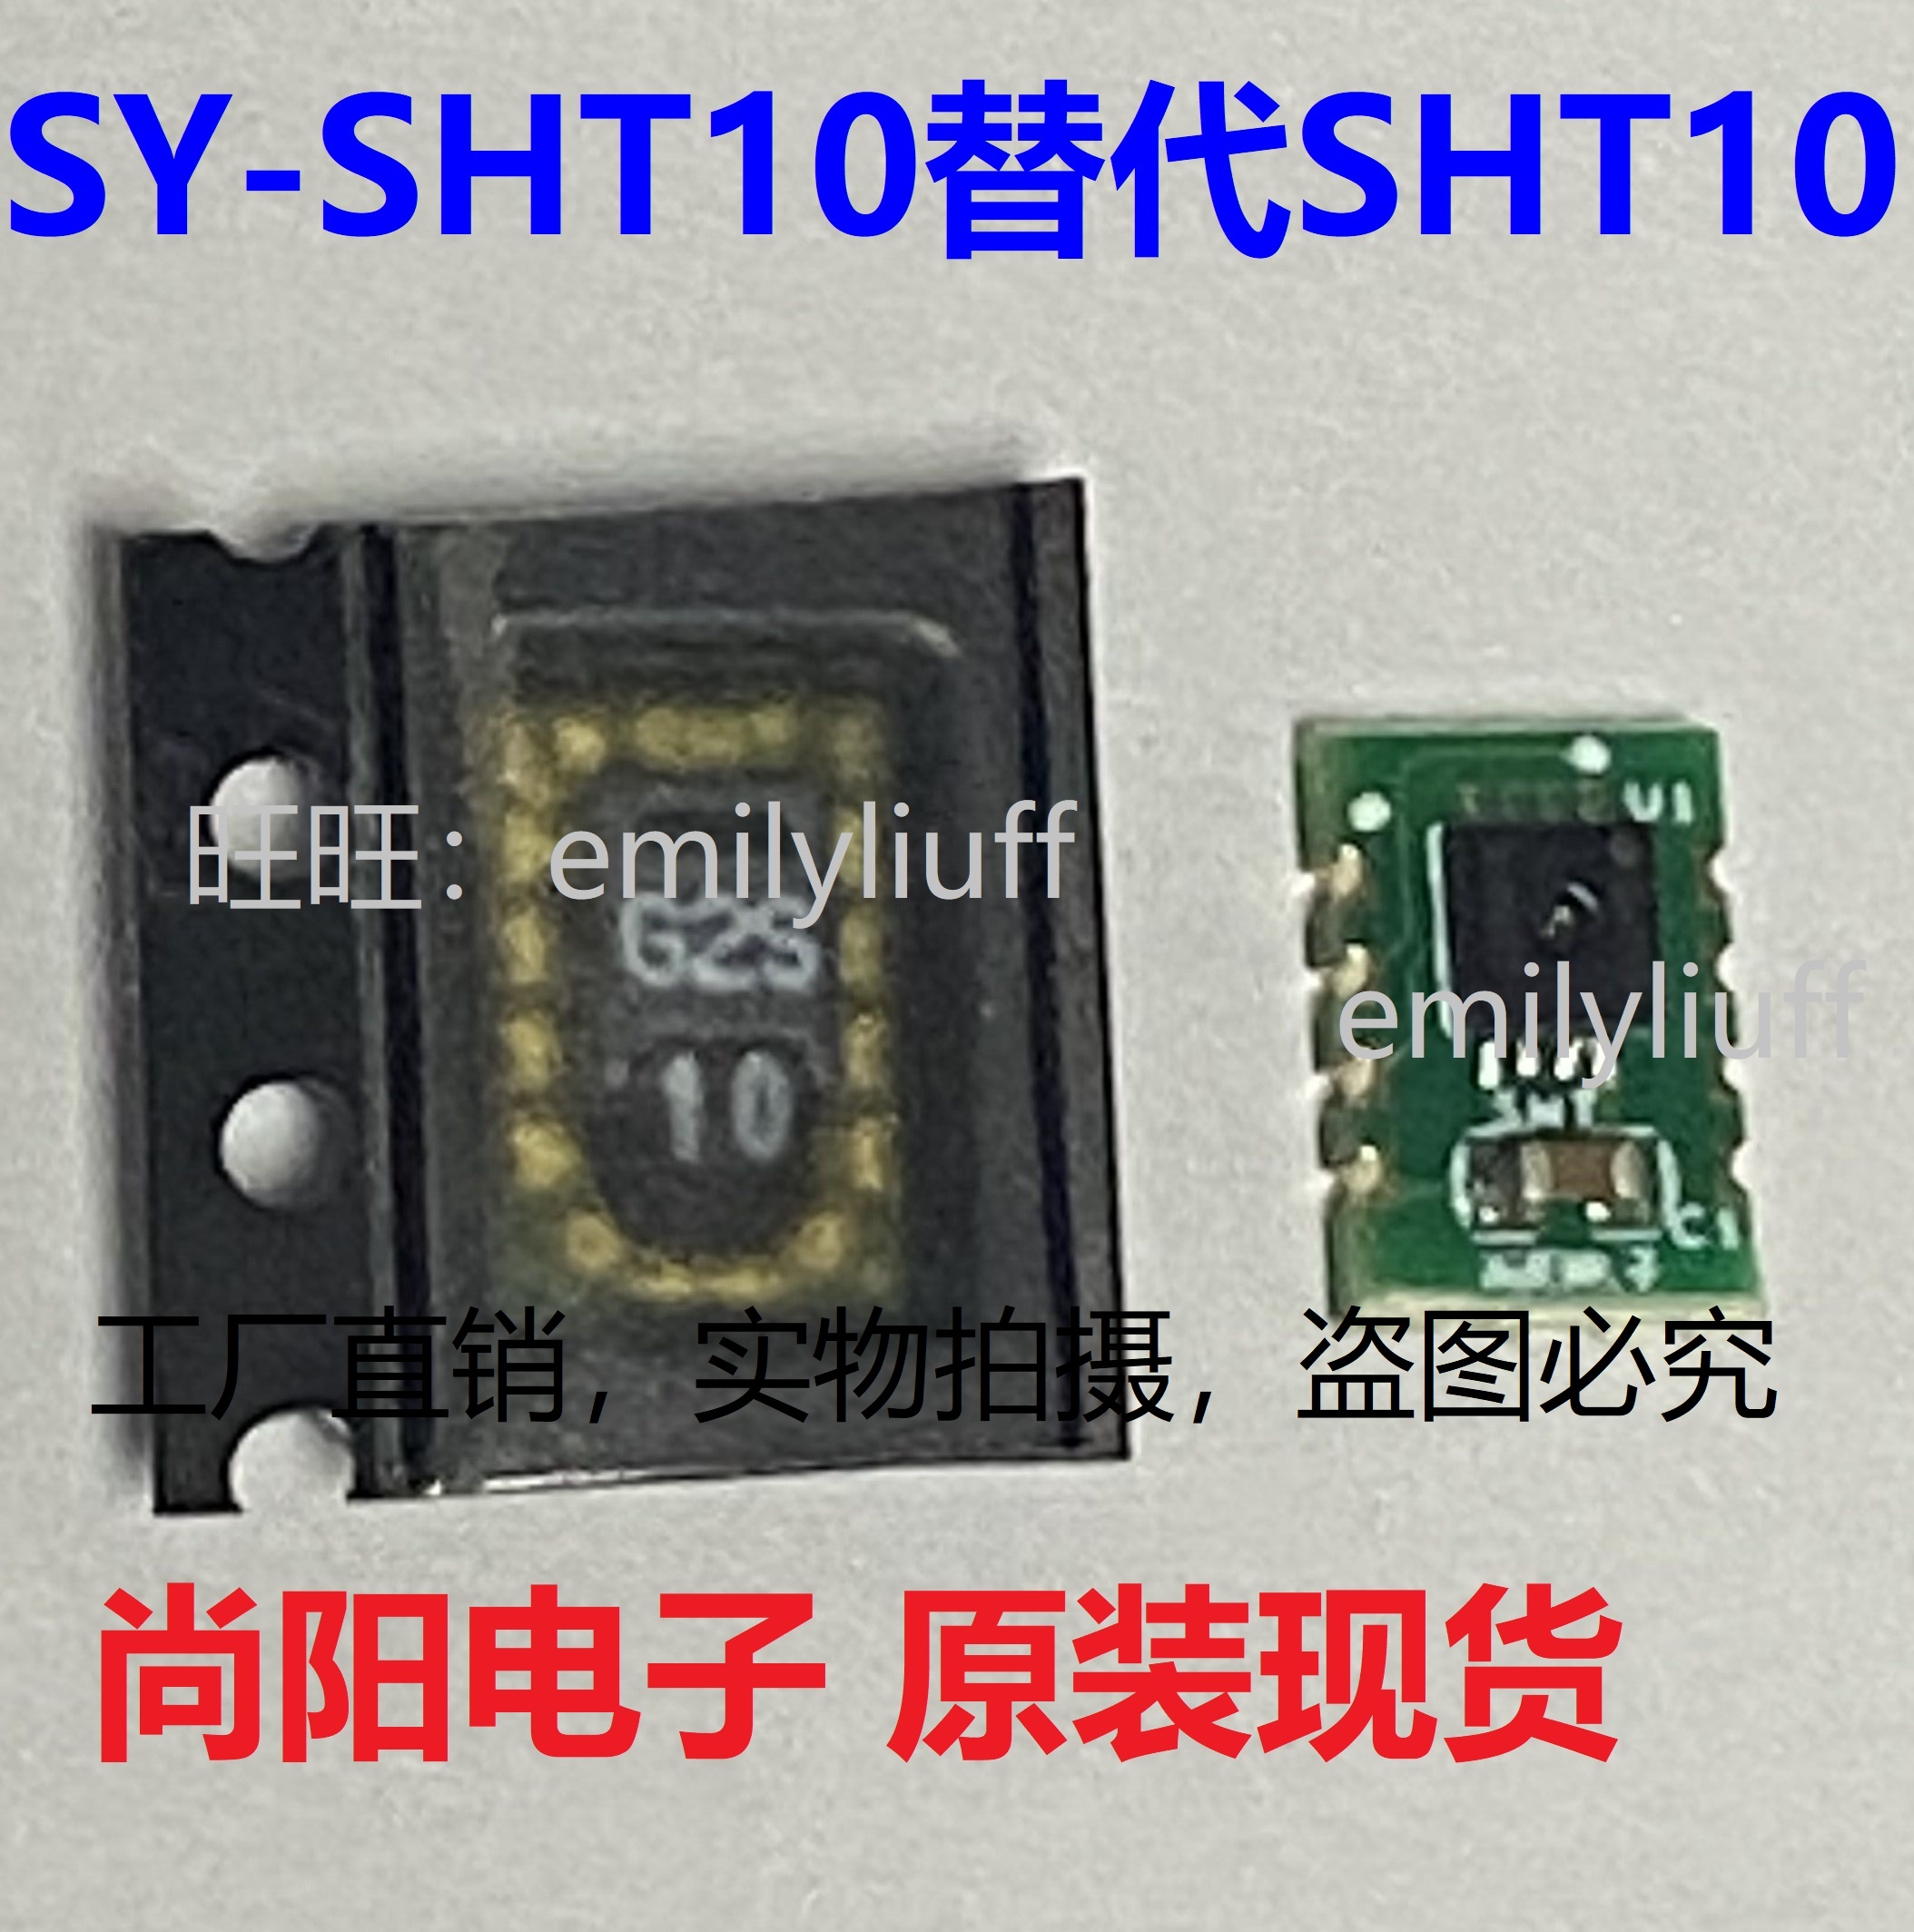 Replacement Of Sy-sht10SHT10 / SHT11 / SHT15 Temperature and humidity sensor for use SY-SHT10 / 11 / 15 provide technology support